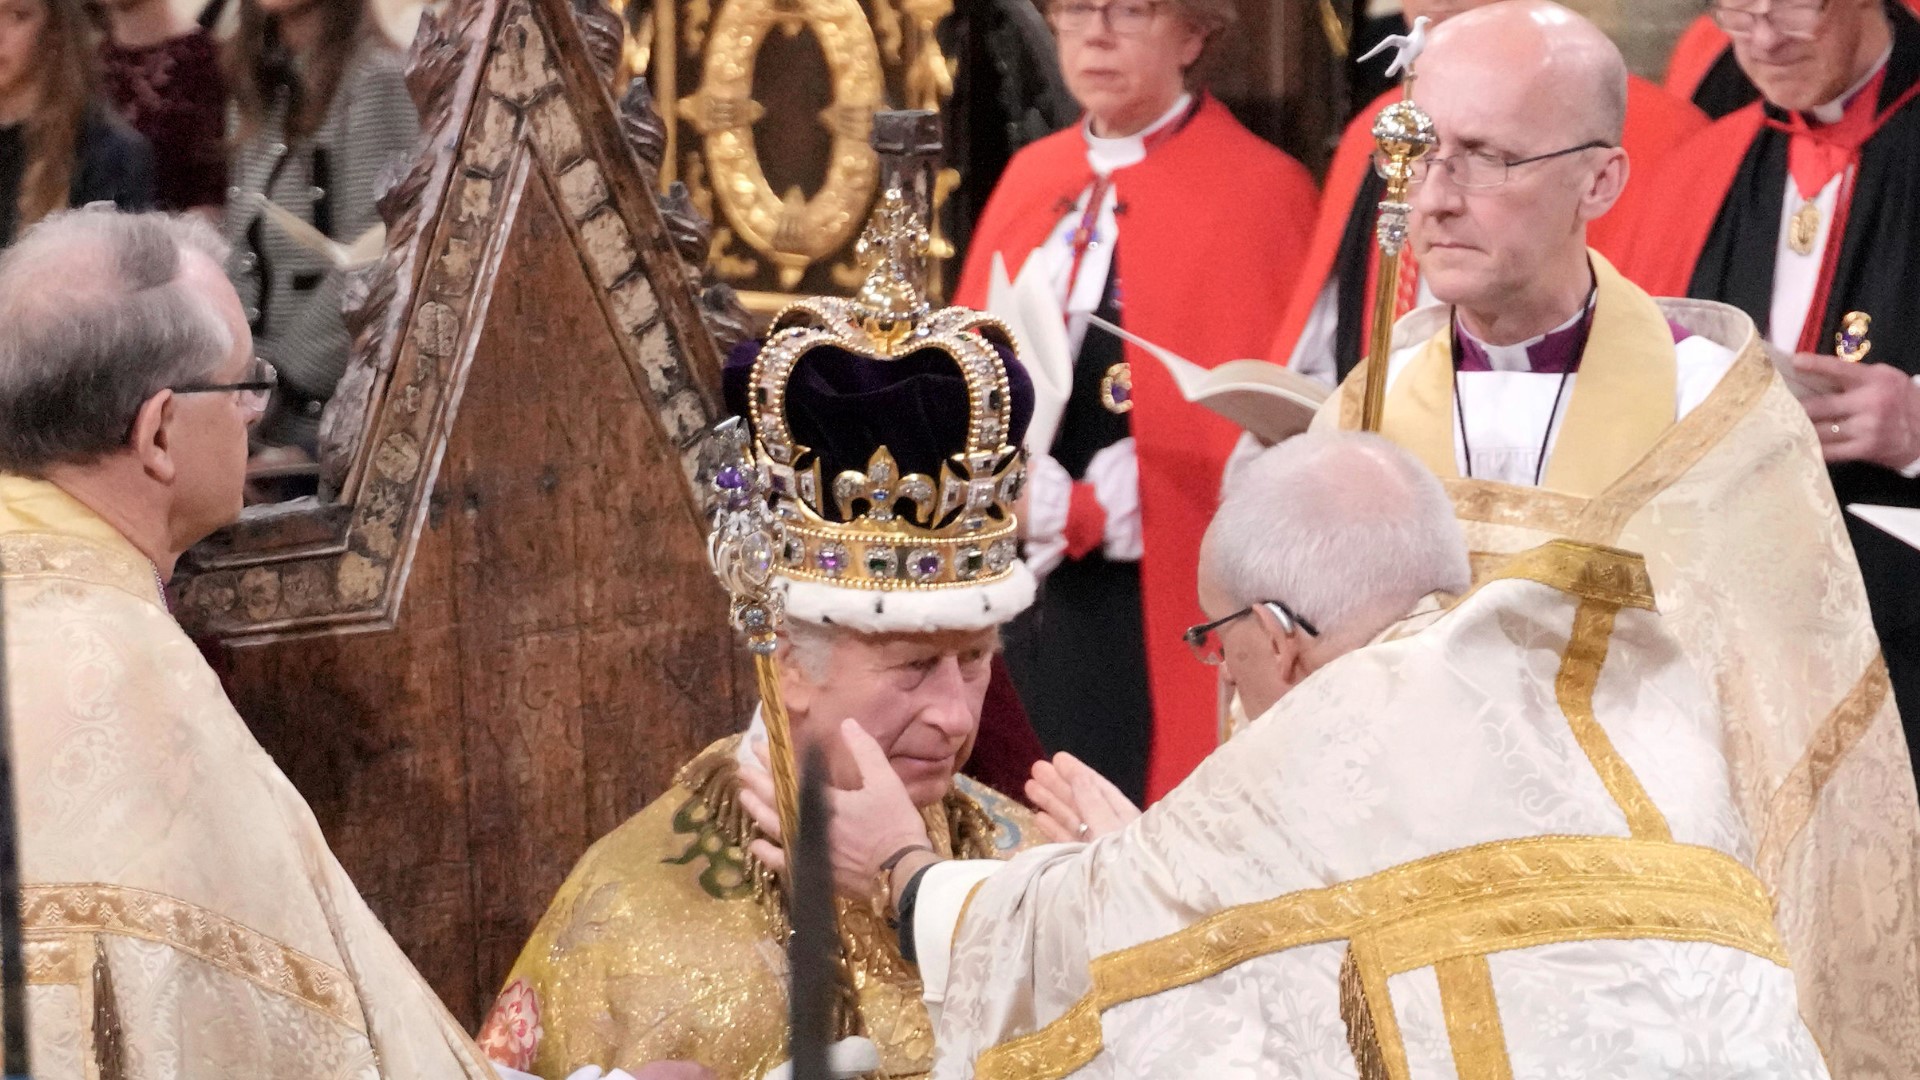 King Charles III was crowned on Saturday at Westminster Abbey, in a ceremony built on ancient traditions, at a time when the U.K. monarchy faces an uncertain future.